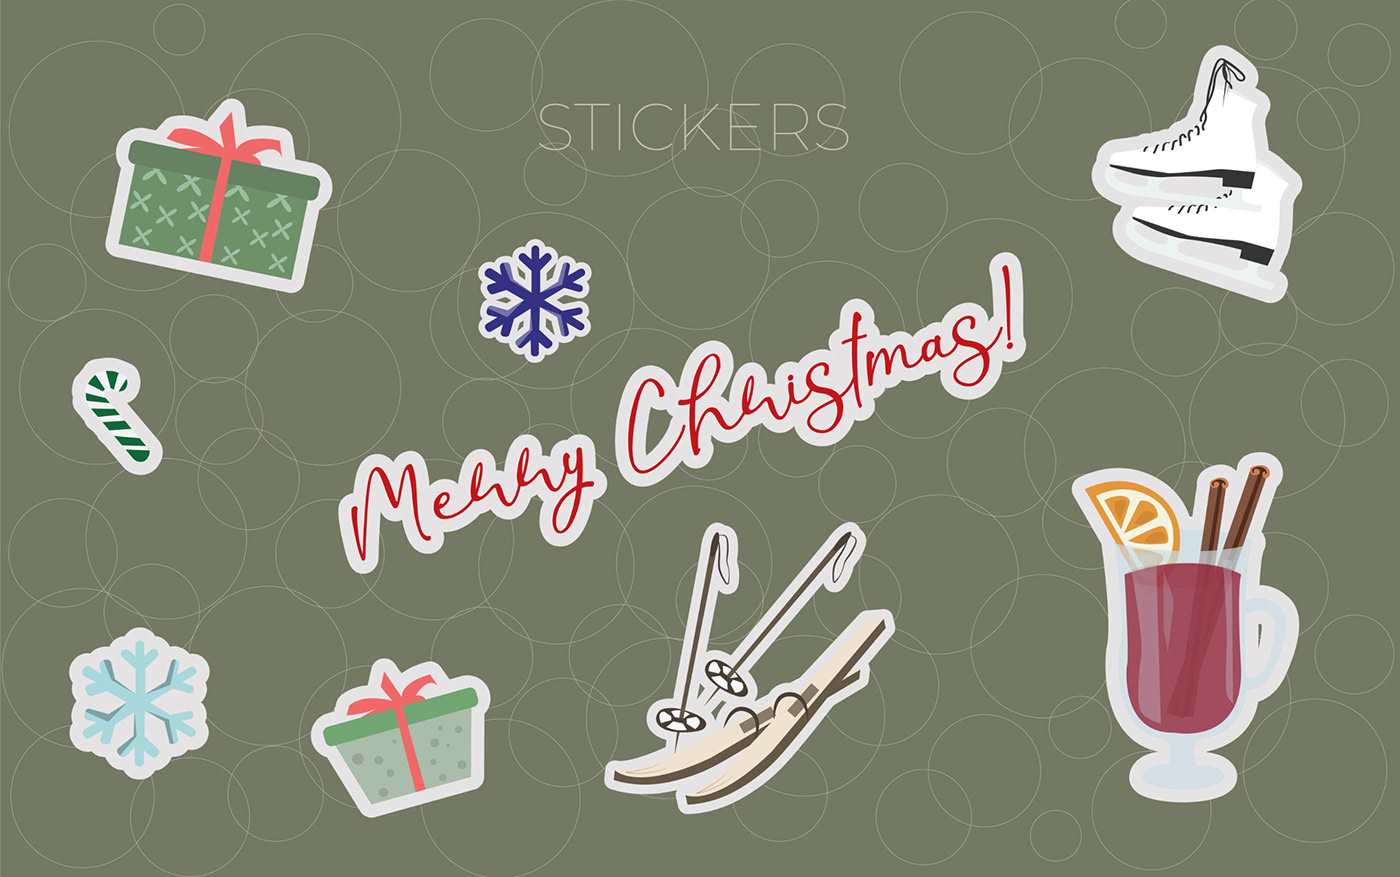 postcards stickers Wrapping paper Christmas